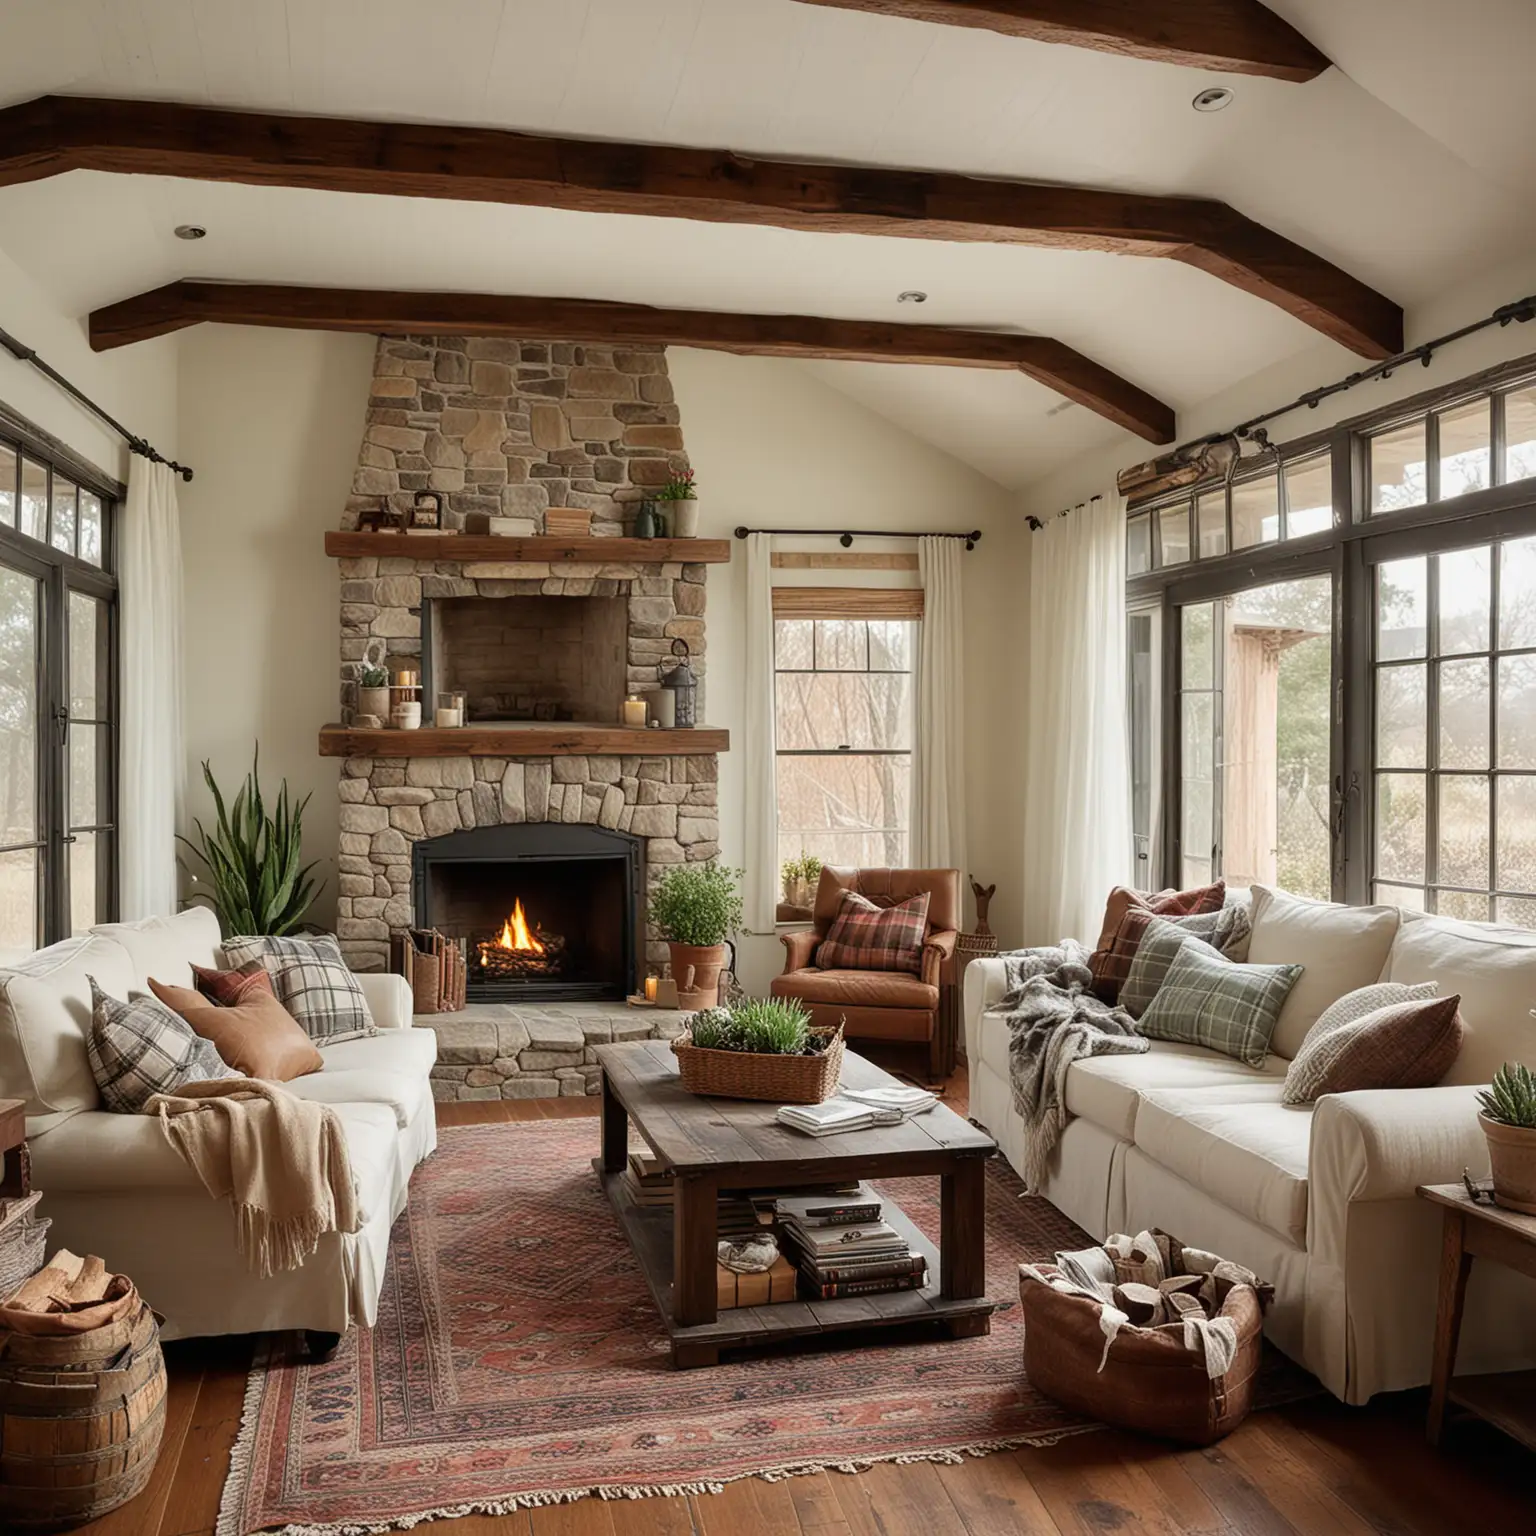 Rustic-Farmhouse-Living-Room-with-Vintage-Charm-and-Cozy-Dcor